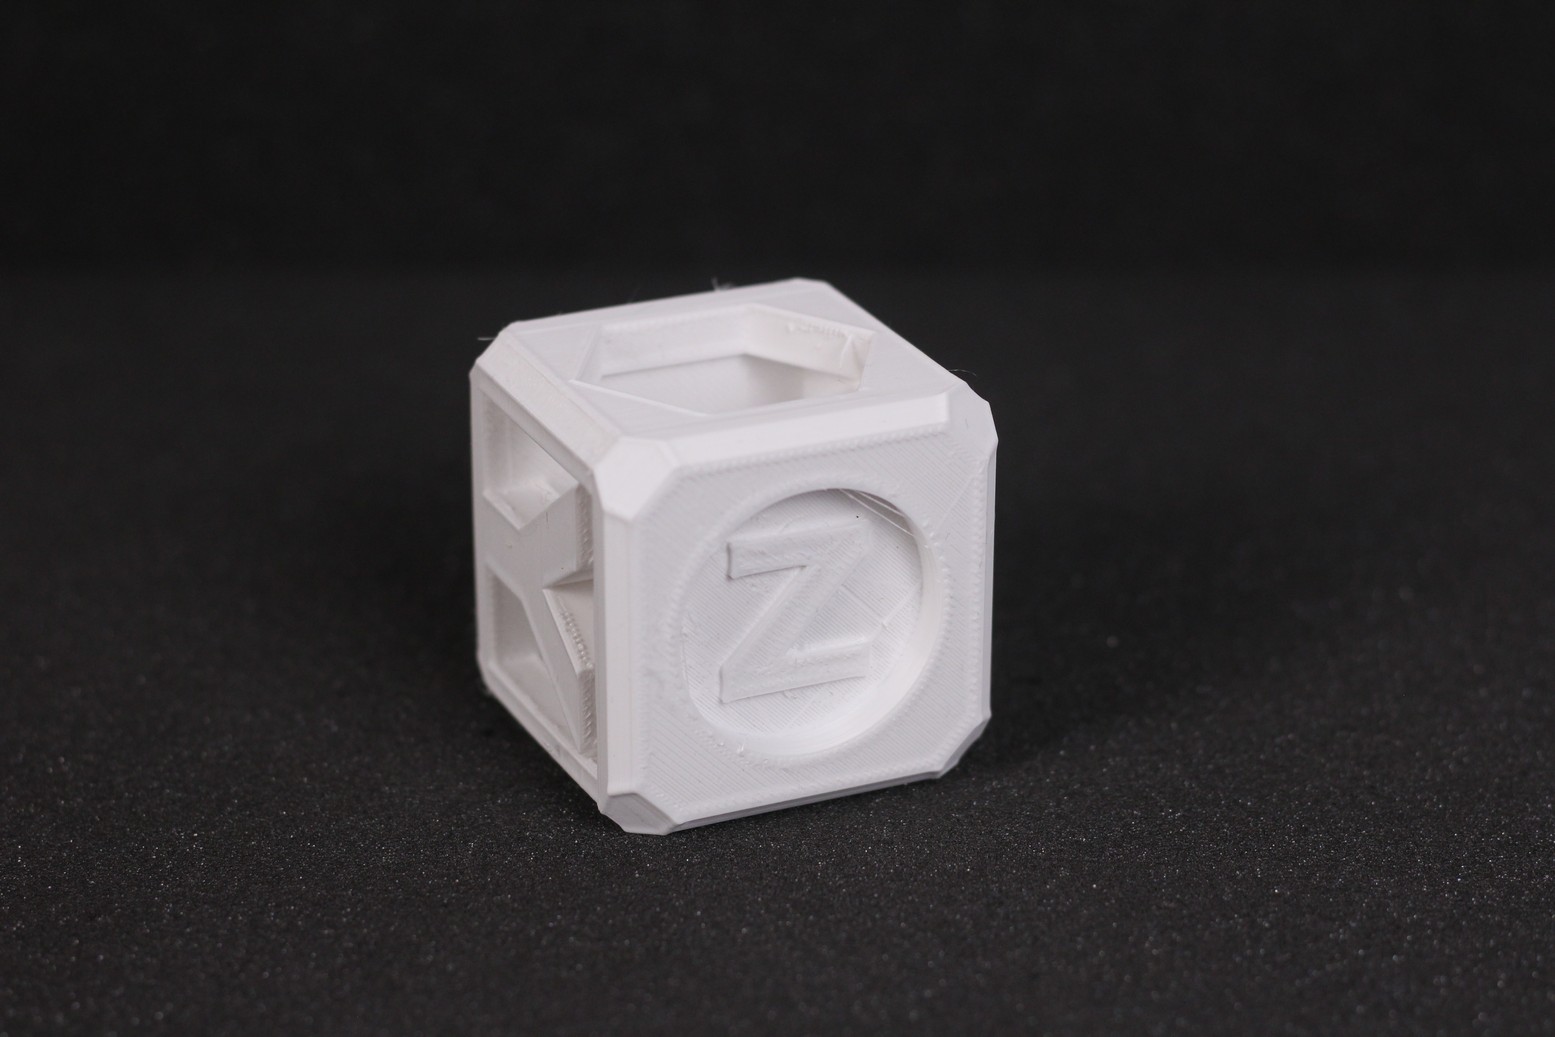 200 Helix Test Cube printed in PETG 5 | Creality Ender 2 Pro Review: Is it worth it?